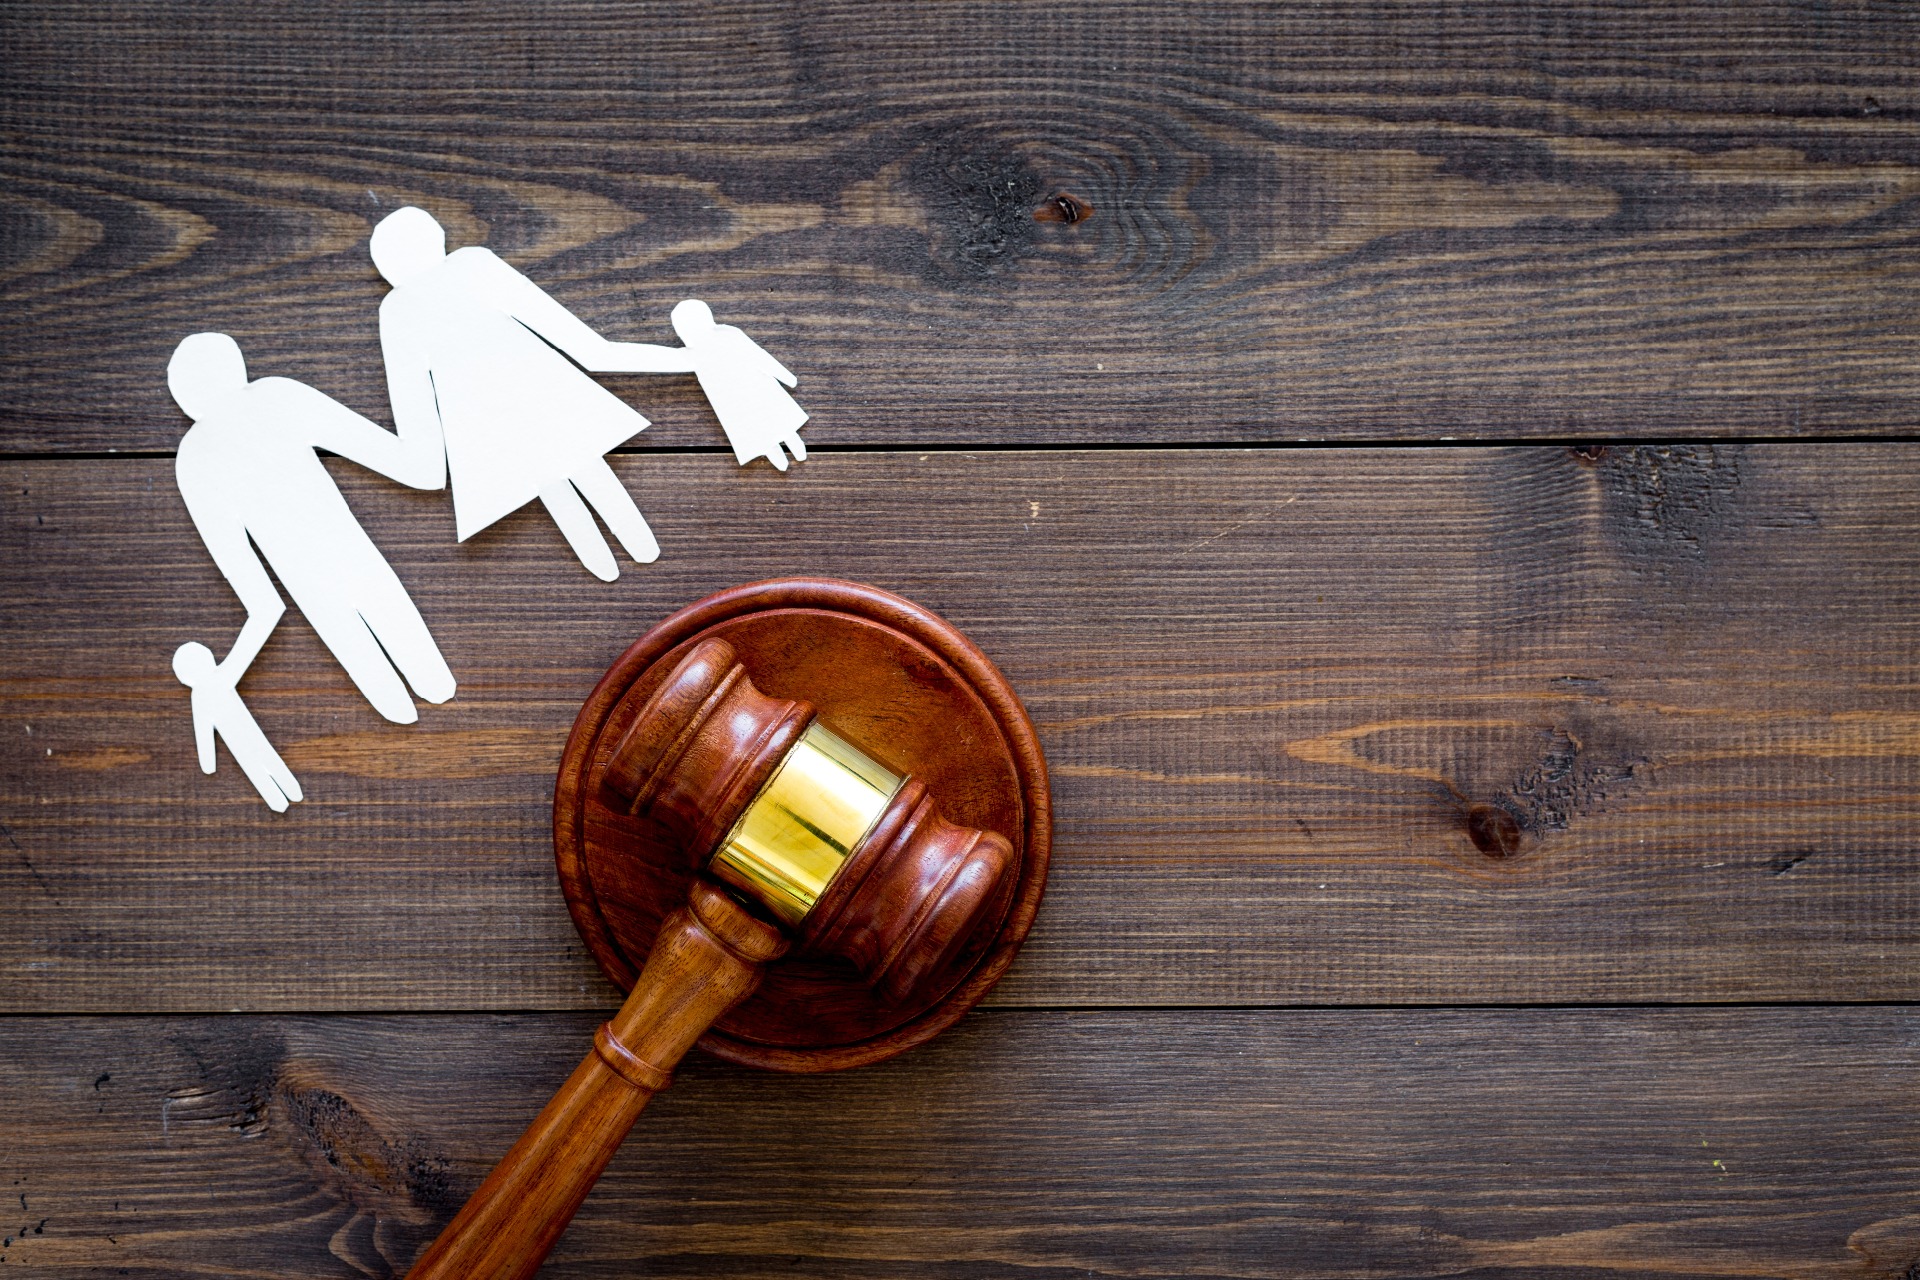 A wooden Gavel used by Judges on a wooden surface, below a paper cut out of two parents and two children.